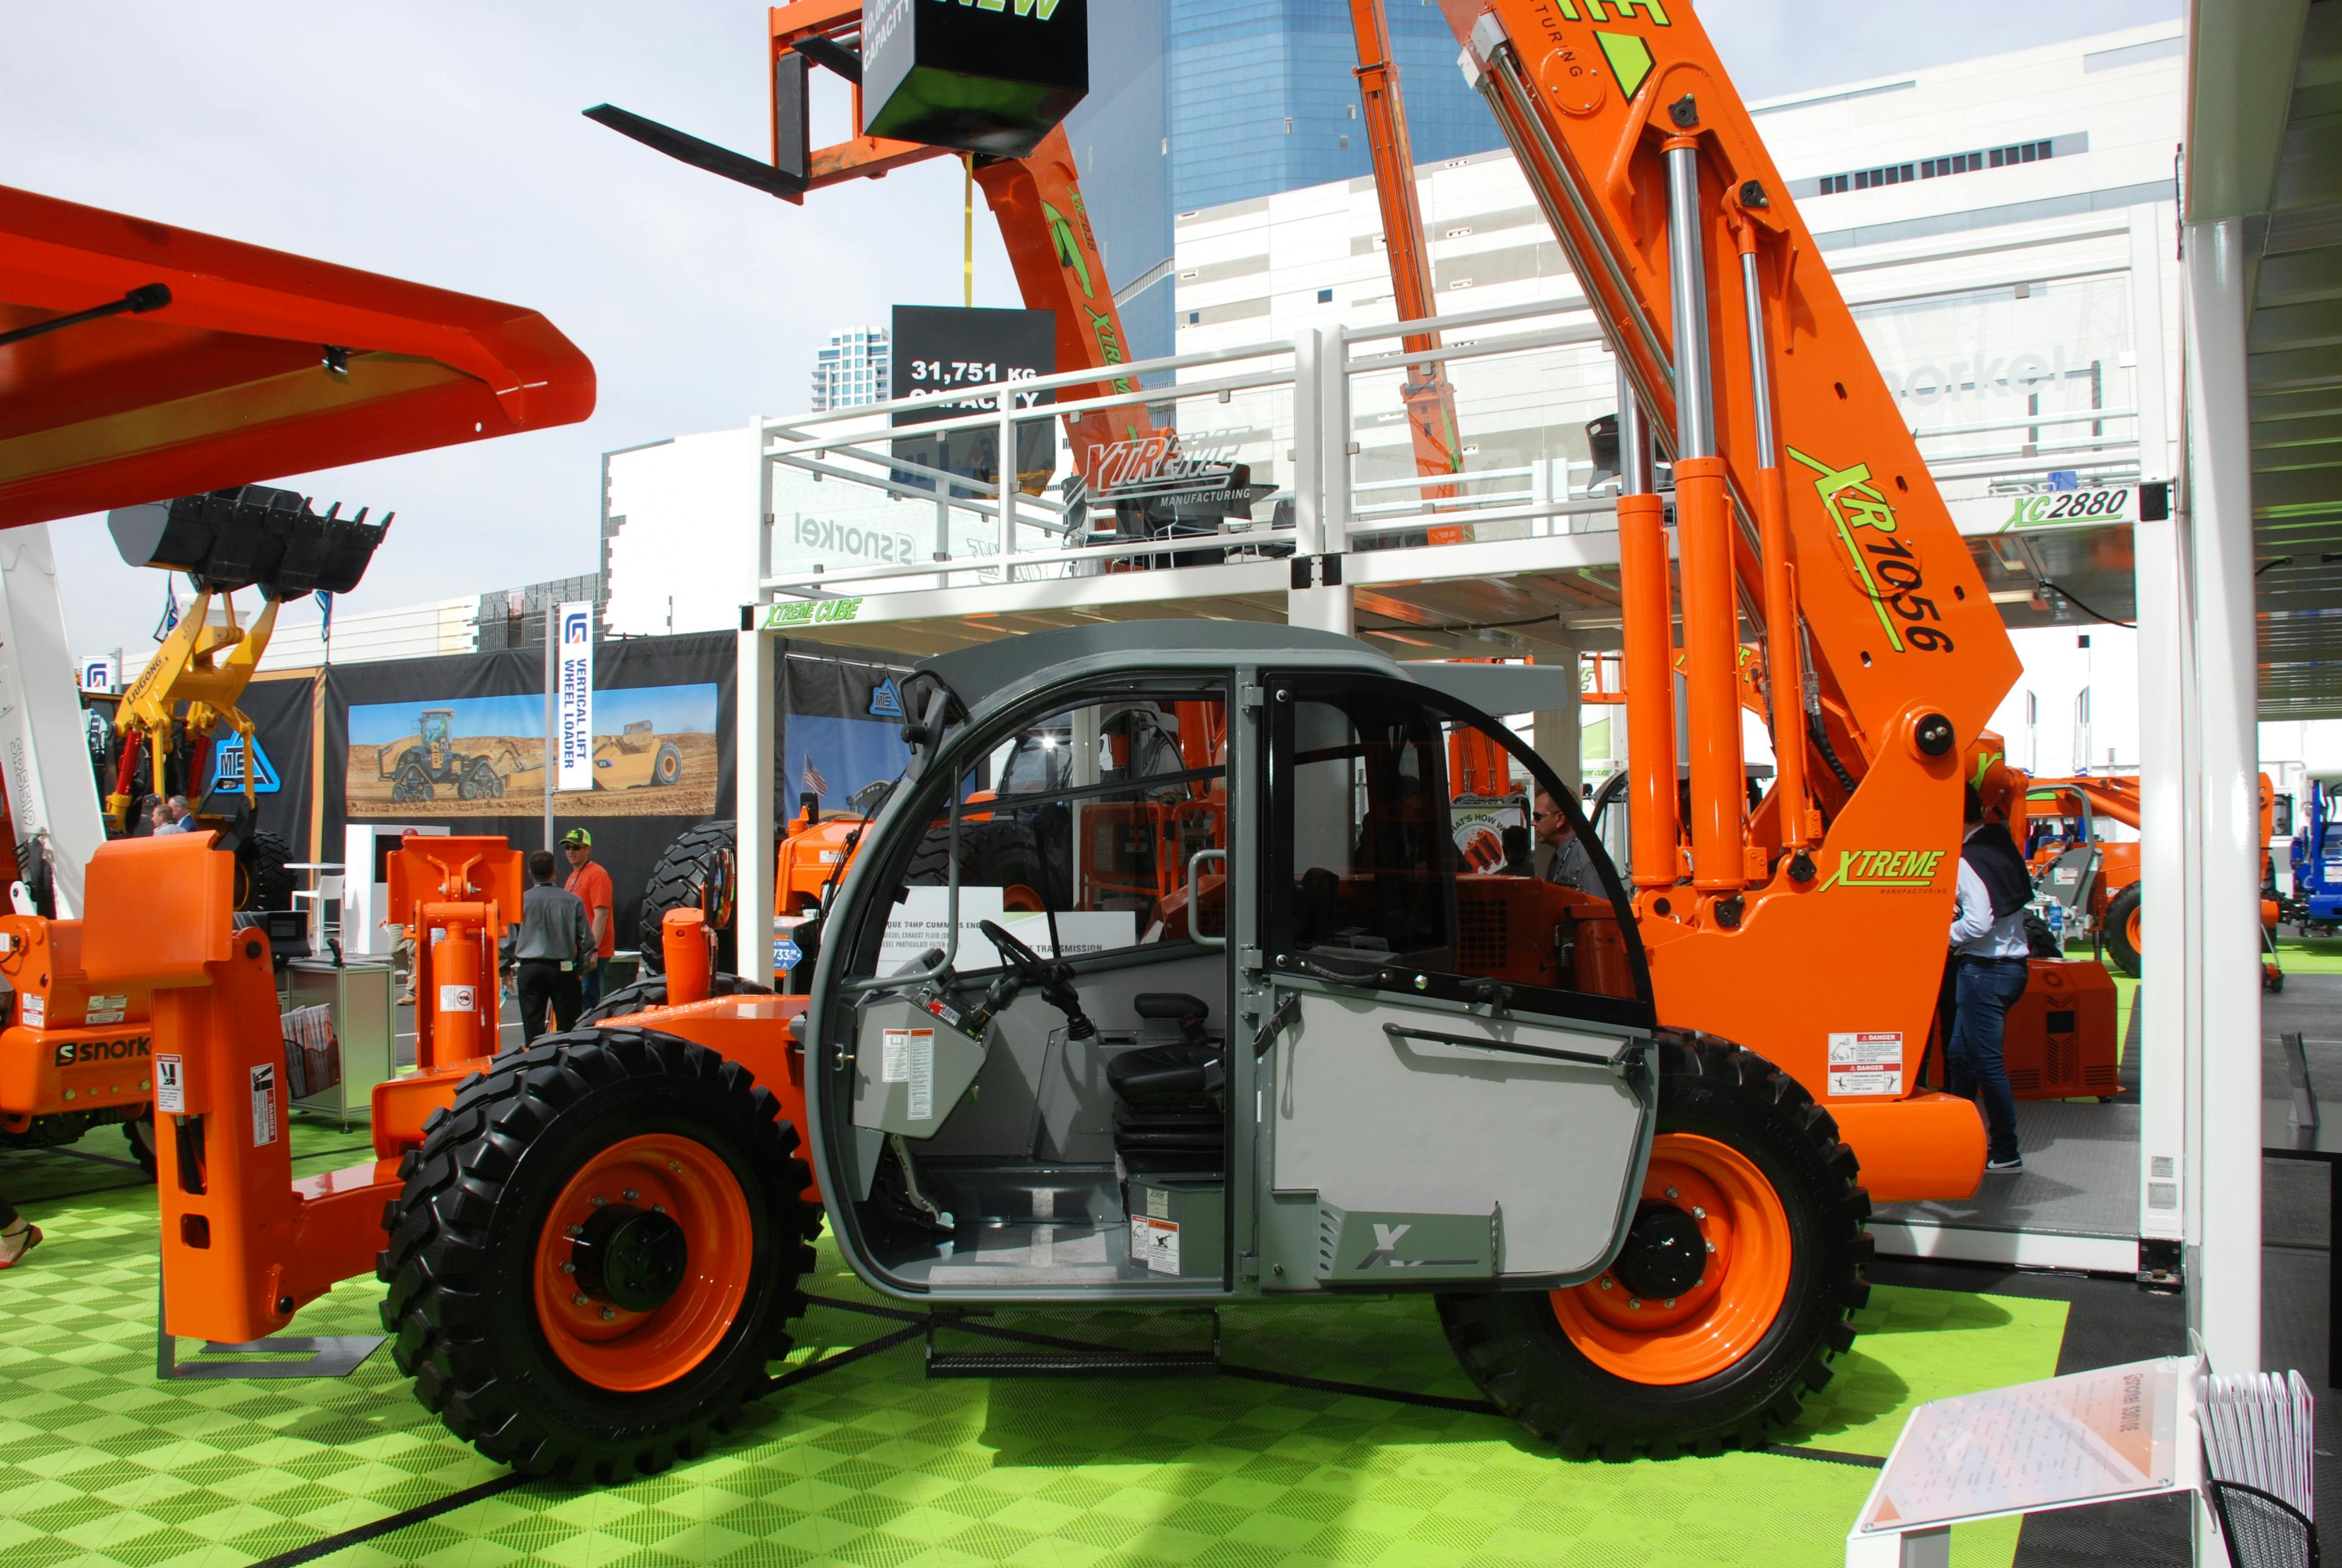 Xtreme Rolls Out XR1056 Telehandler at ConExpo | Construction News